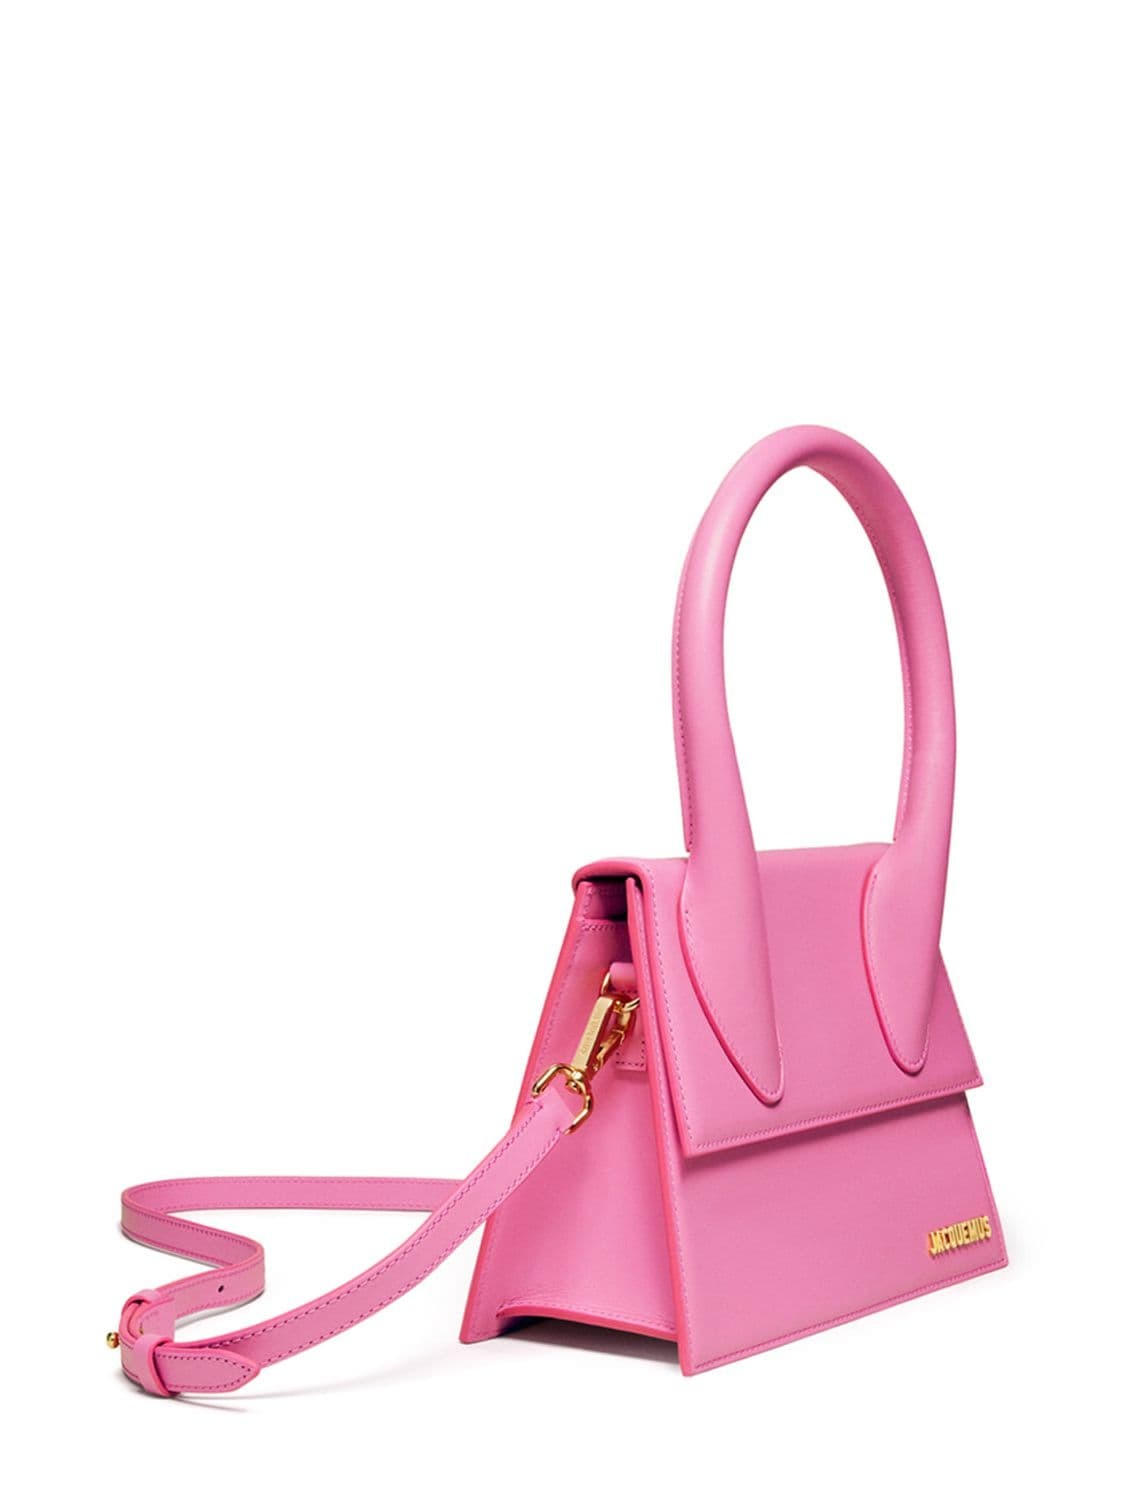 JACQUEMUS Le Grand Chiquito Top Handle Bag in pink